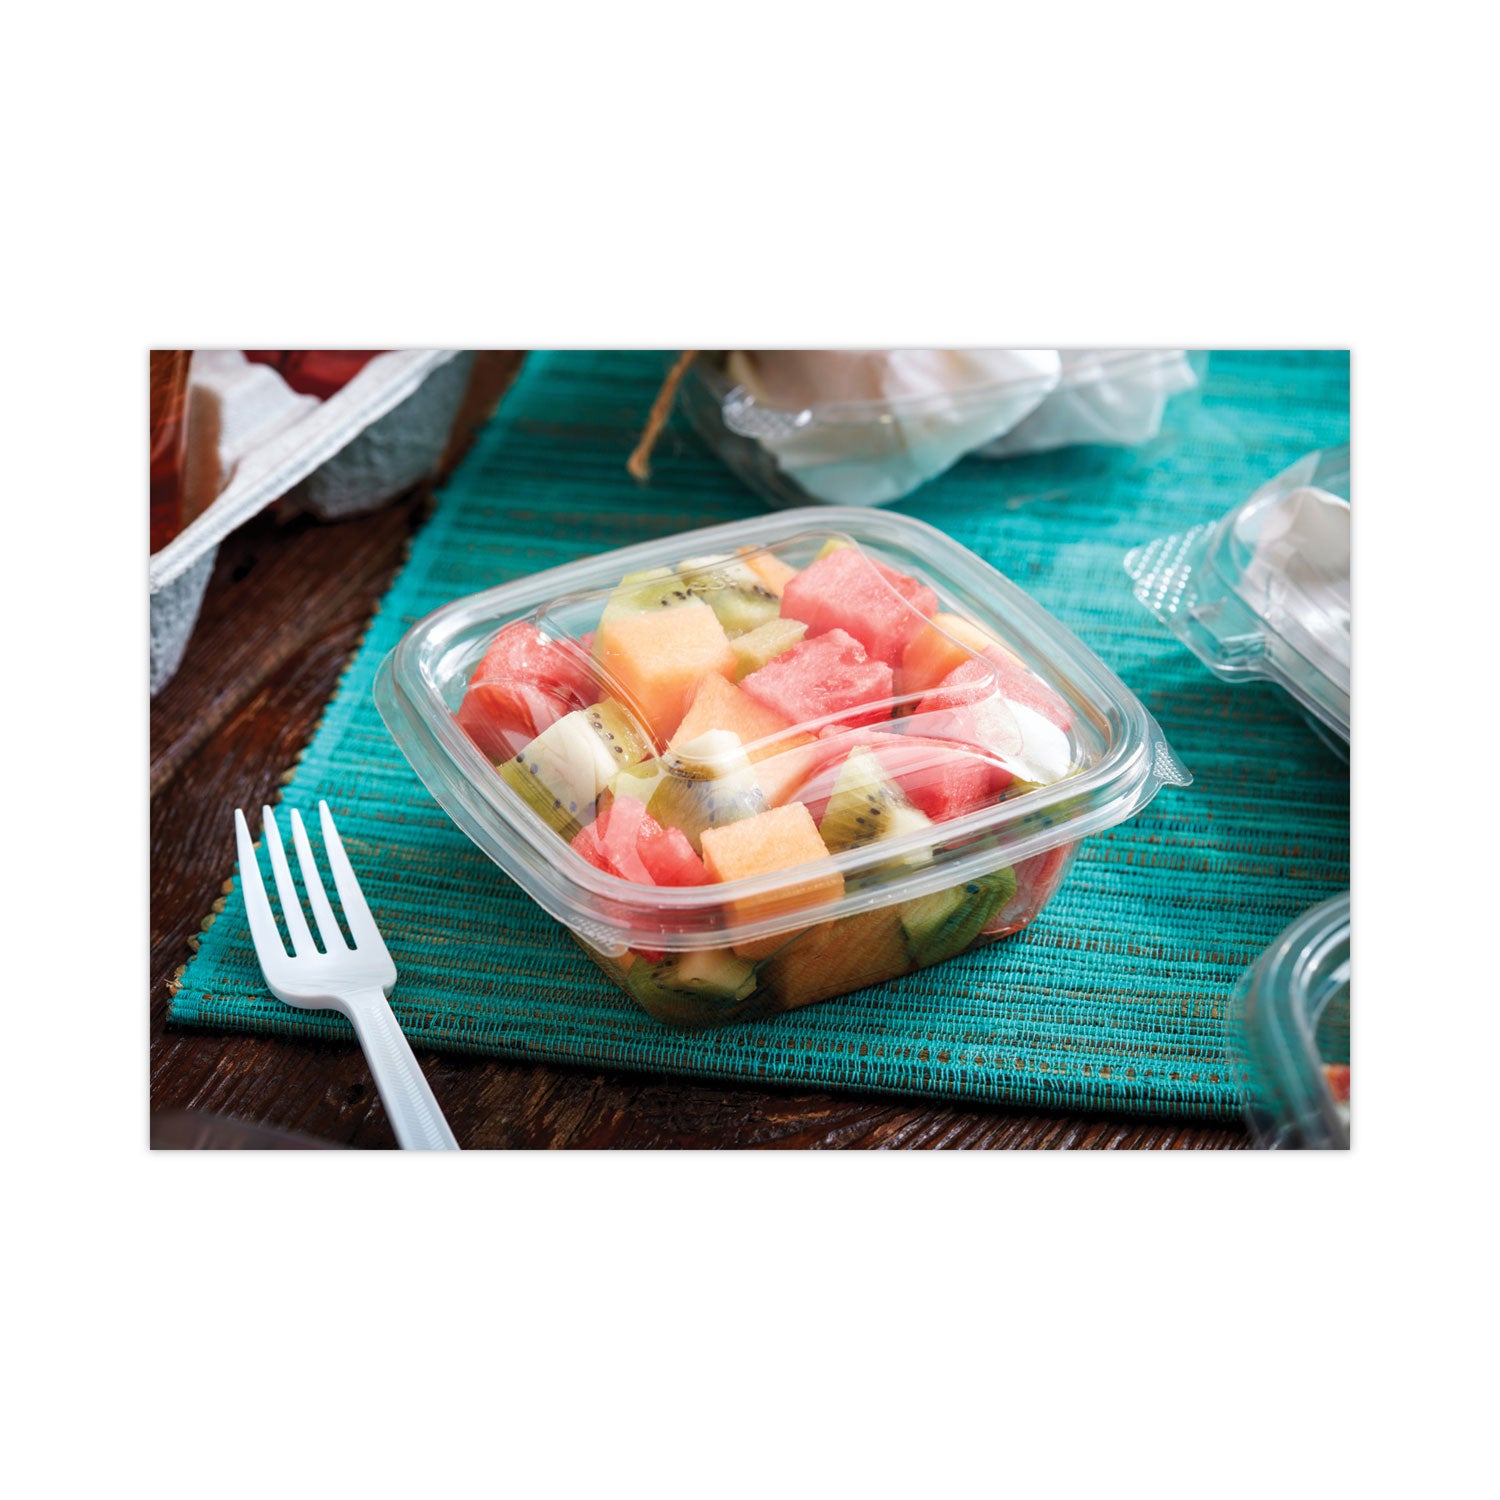 earthchoice-square-recycled-bowl-12-oz-5-x-5-x-163-clear-plastic-504-carton_pctsac0512 - 5